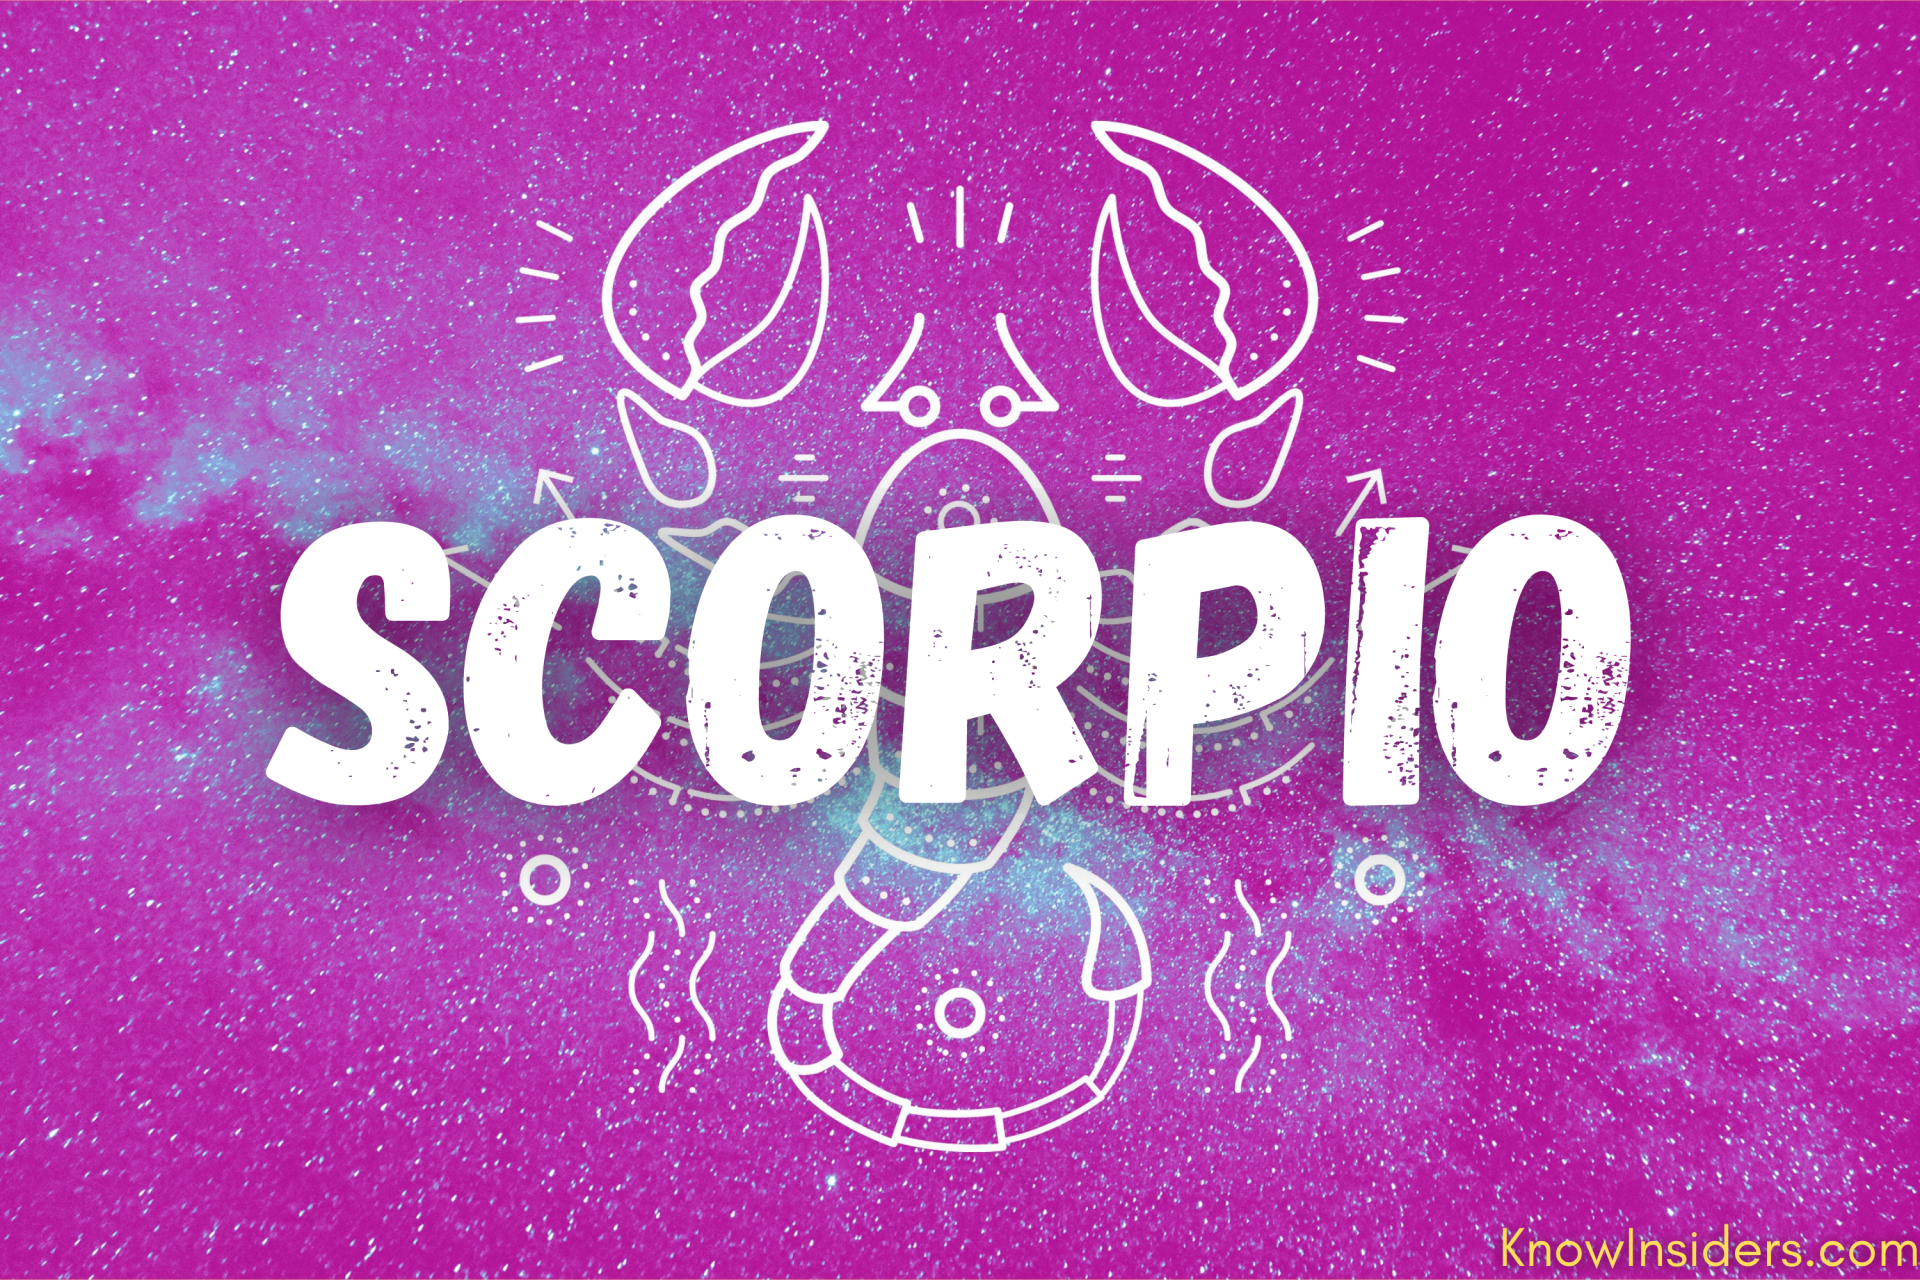 Top 5 The Freakiest Zodiac Signs In Bed According To Astrology